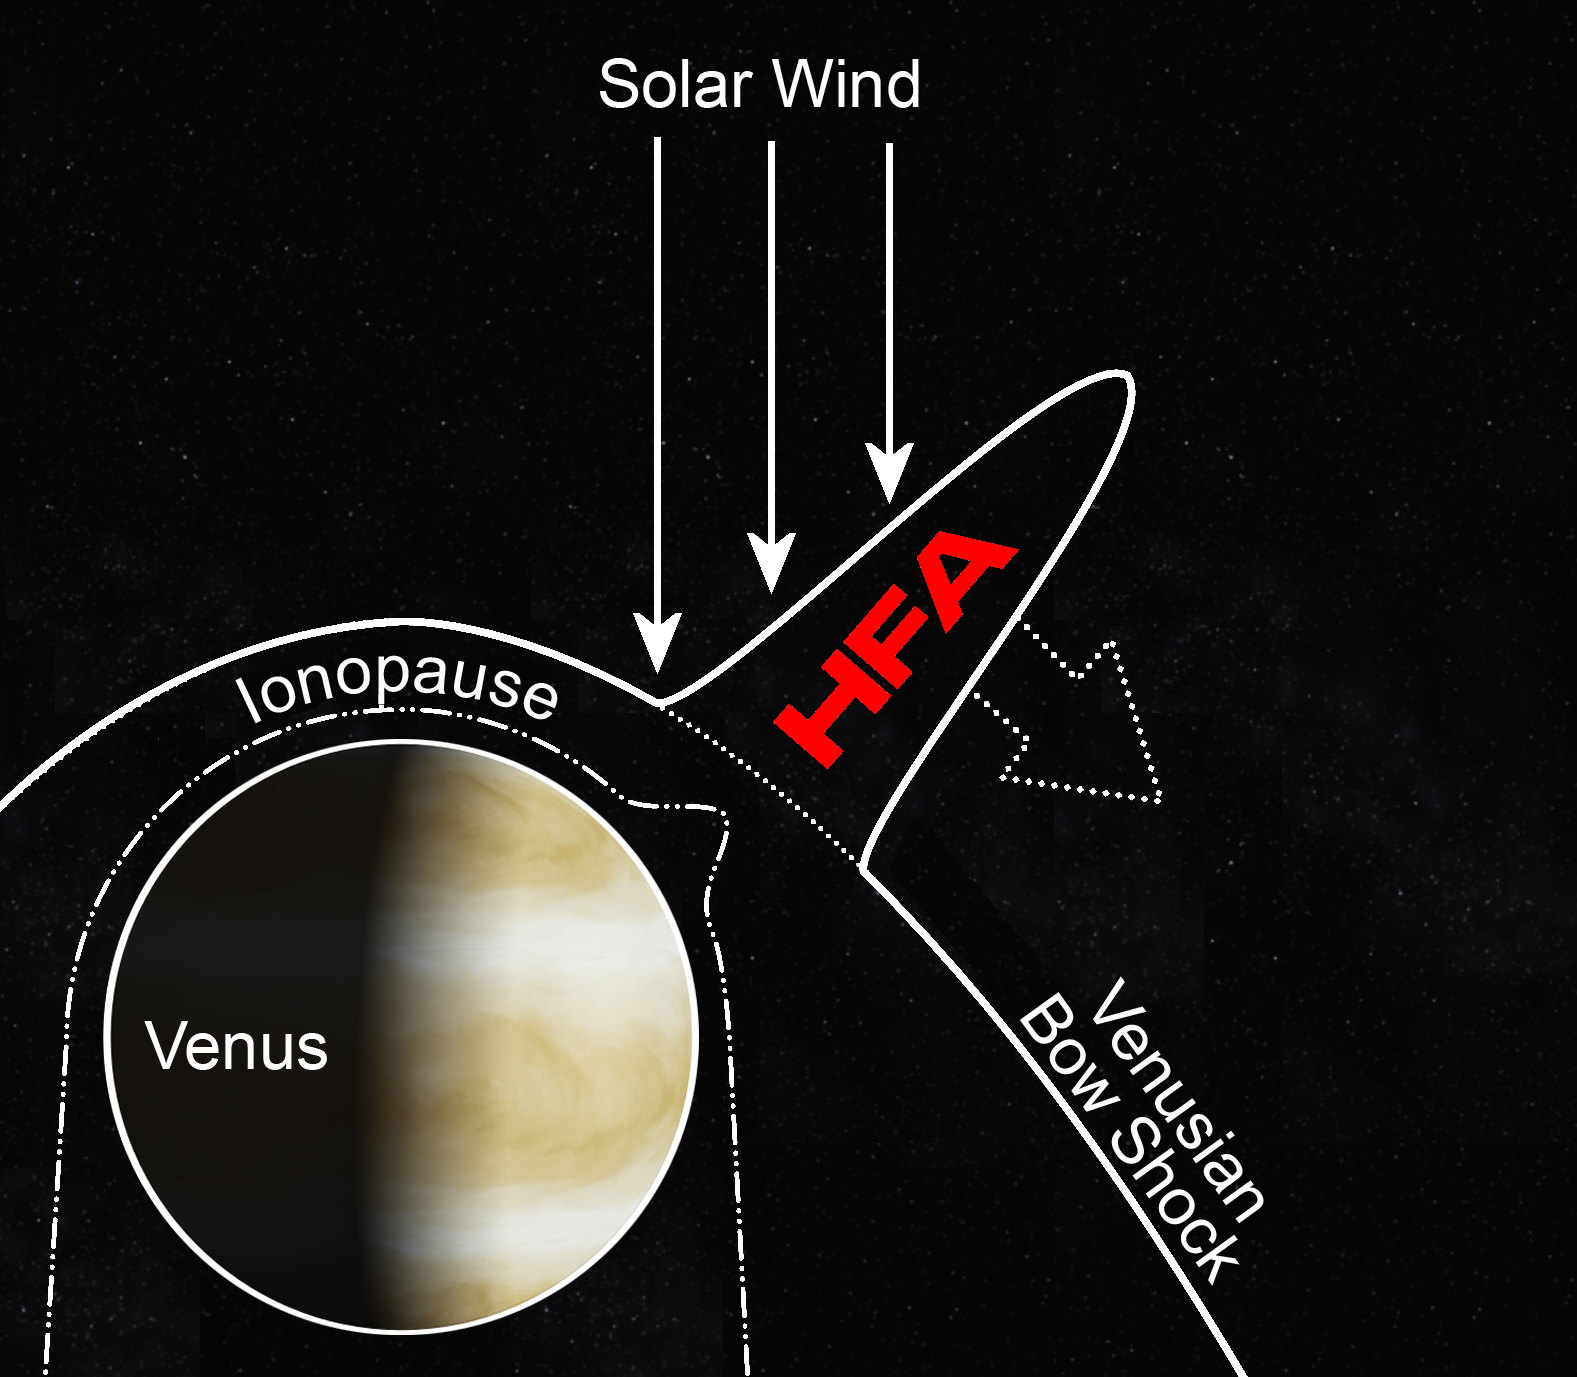 Hot flow anomalies – surprising explosions on Venus caused by space weather